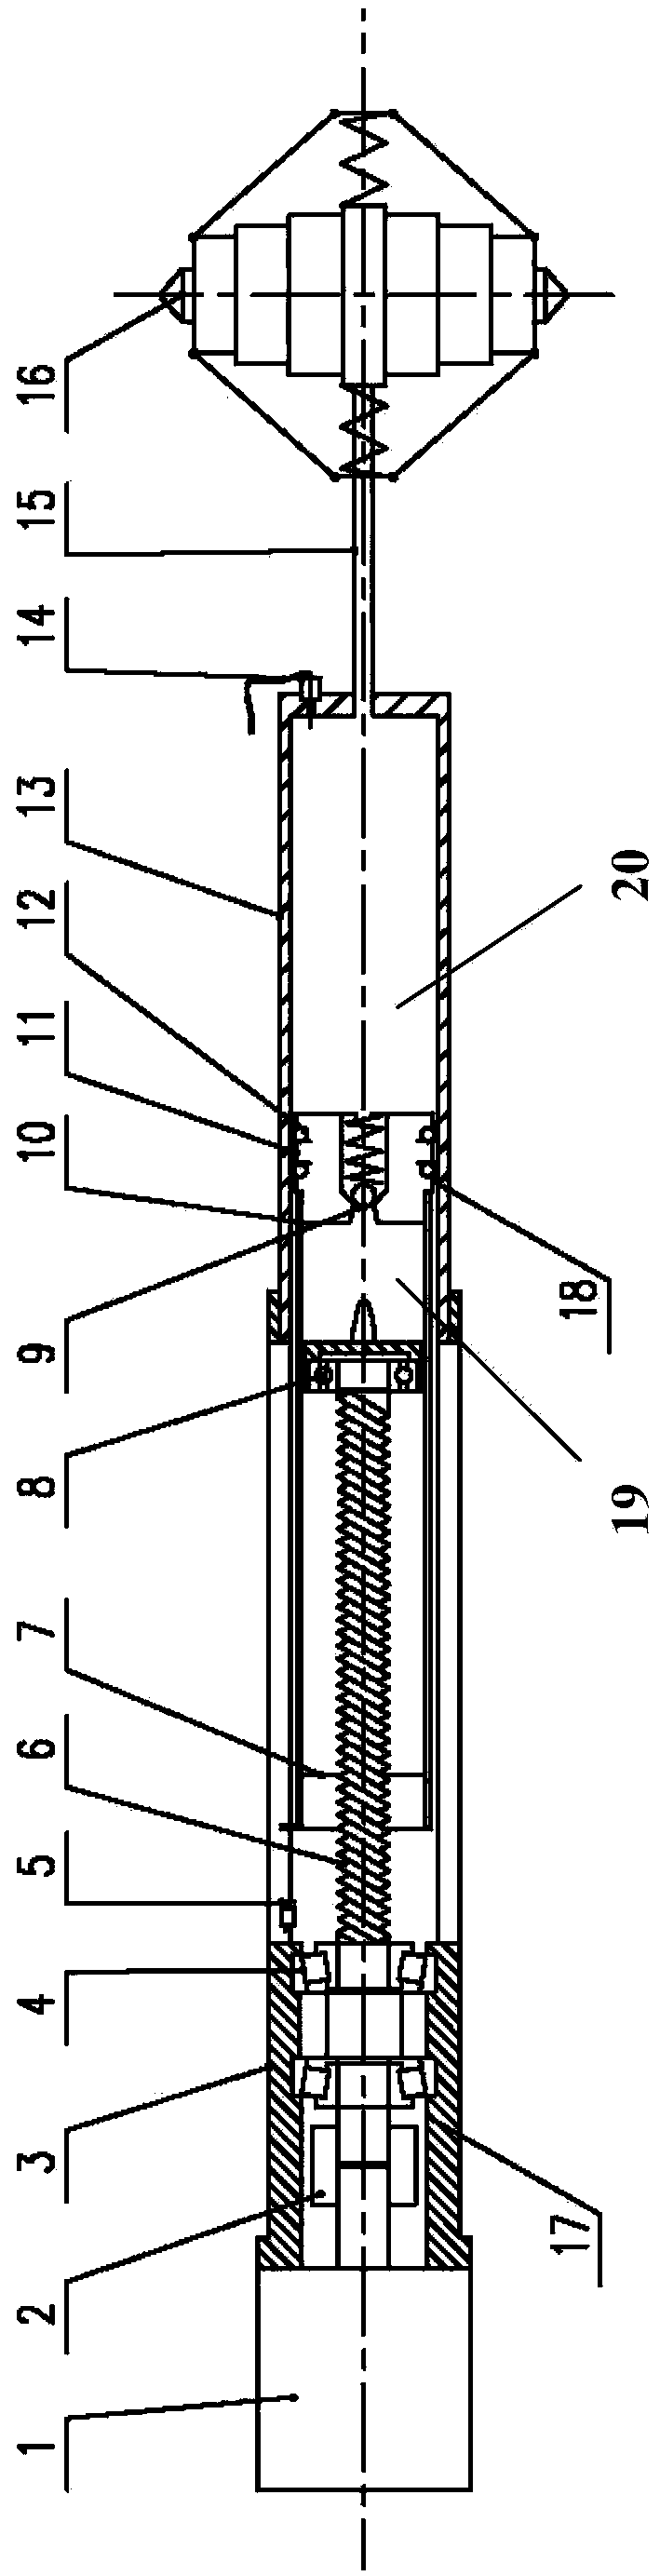 Hydraulic driving system for driving electrode telescoping ram